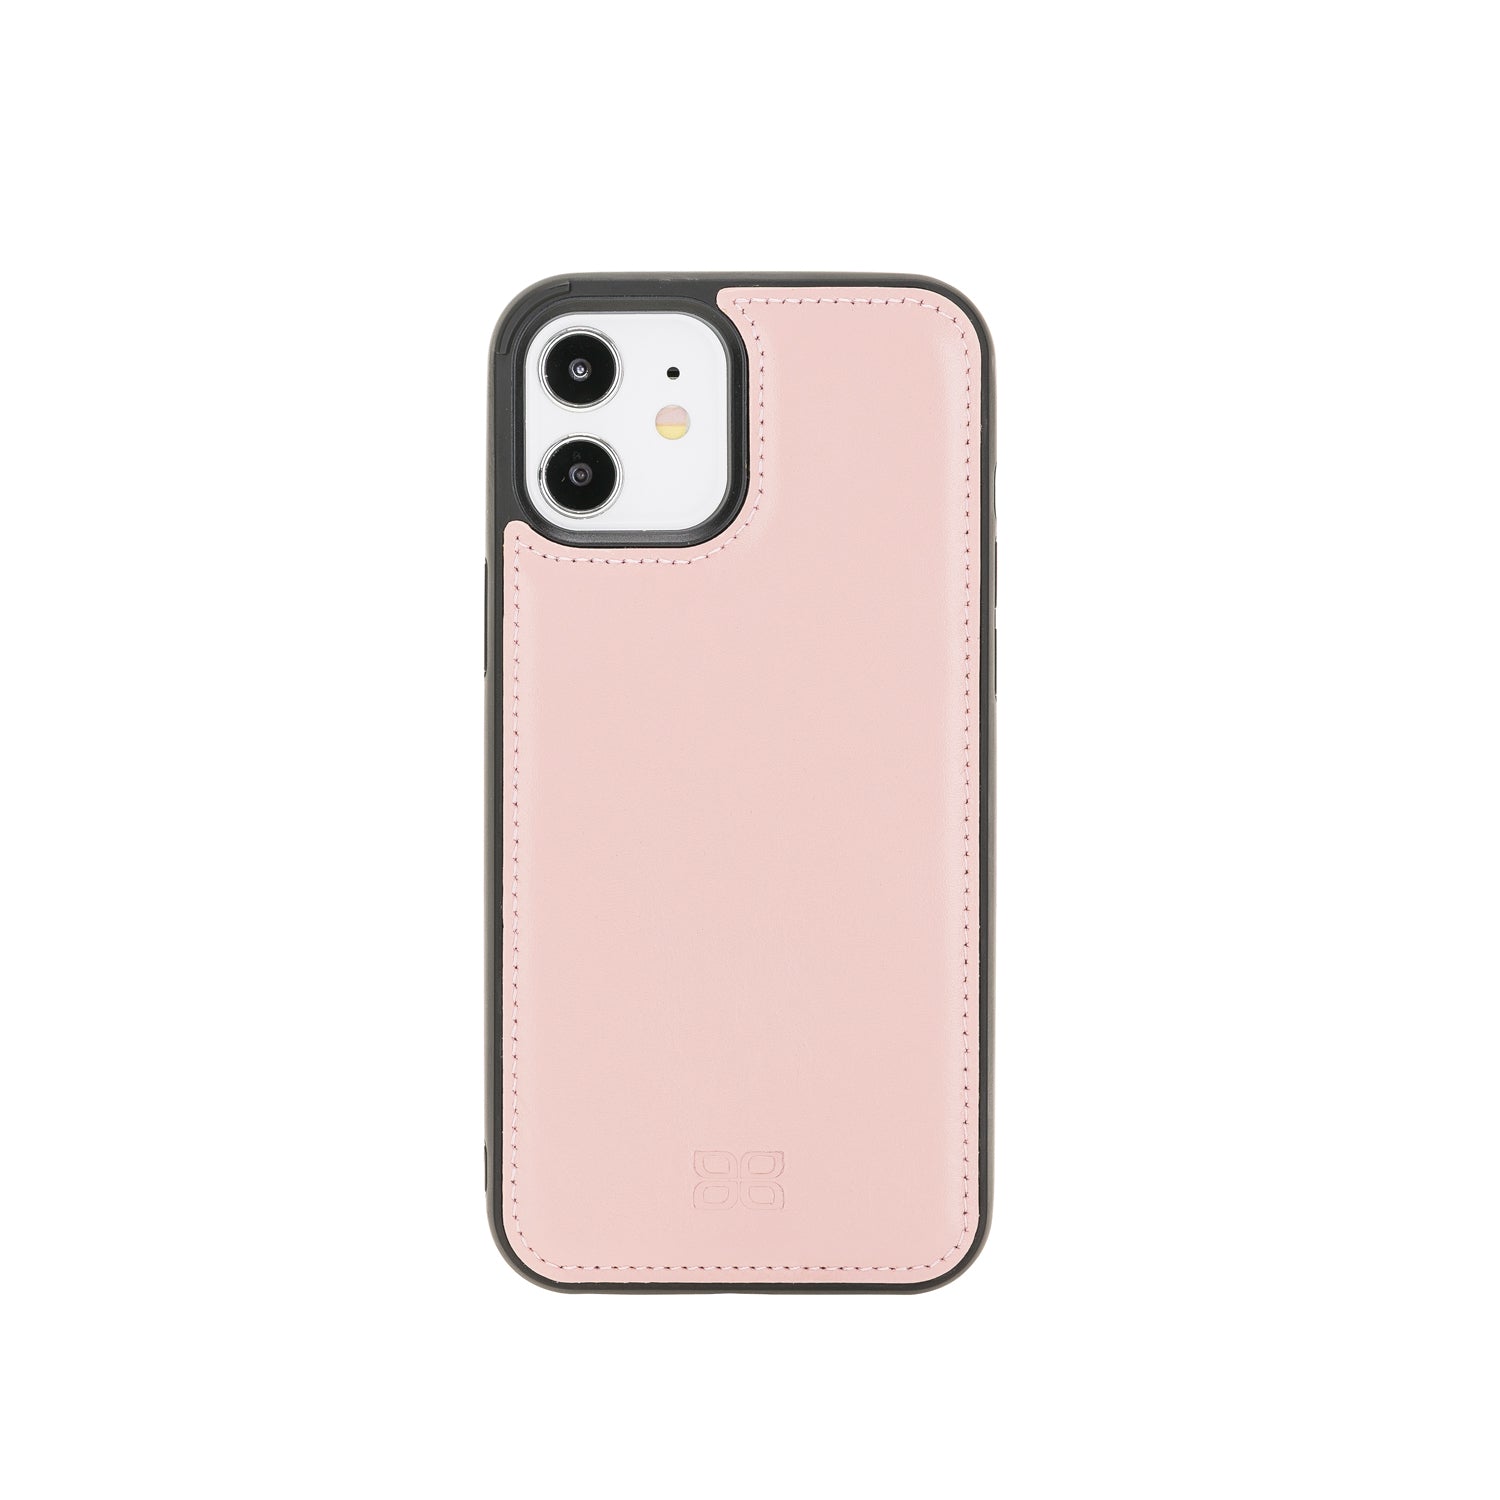 Flex Cover Leather Back Case for iPhone 12 Mini (5.4") - PINK - saracleather